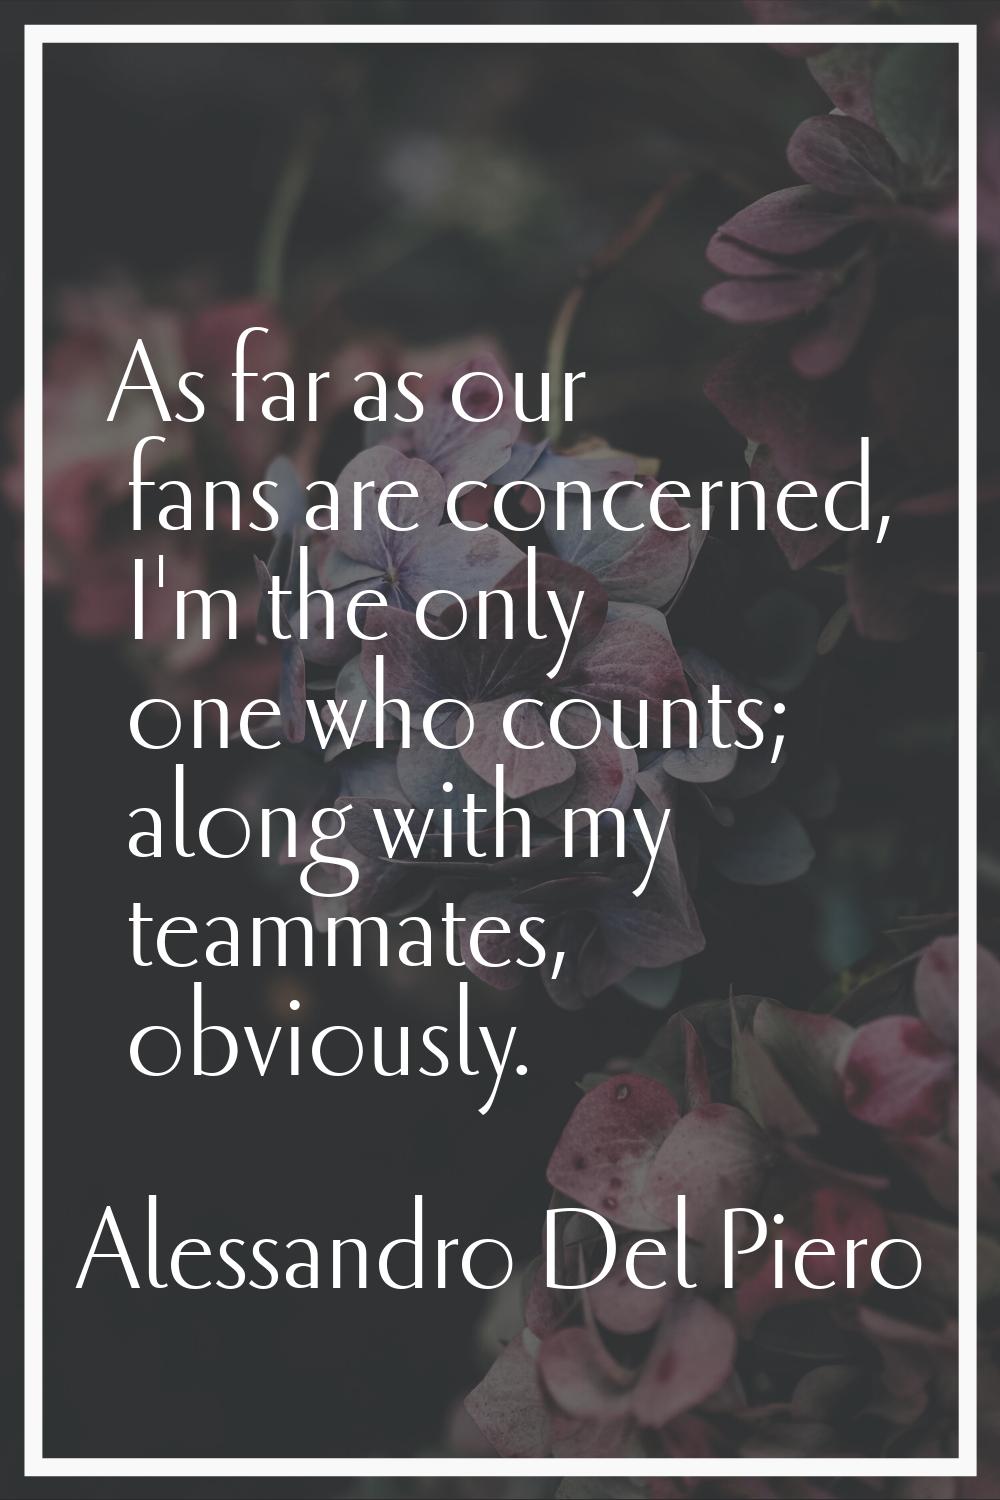 As far as our fans are concerned, I'm the only one who counts; along with my teammates, obviously.